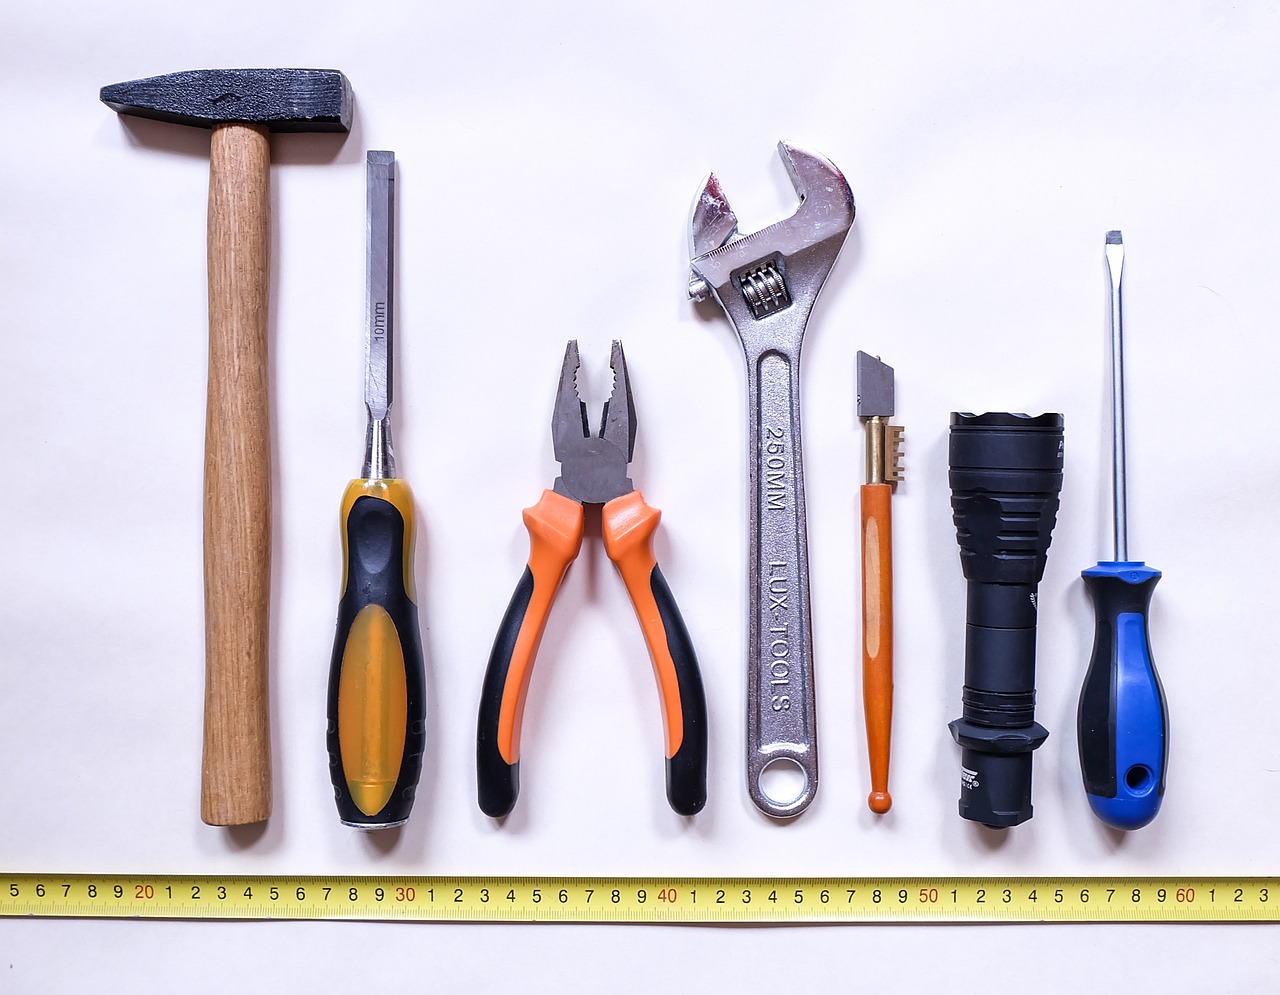 basic necessities for tools around the house against a white background